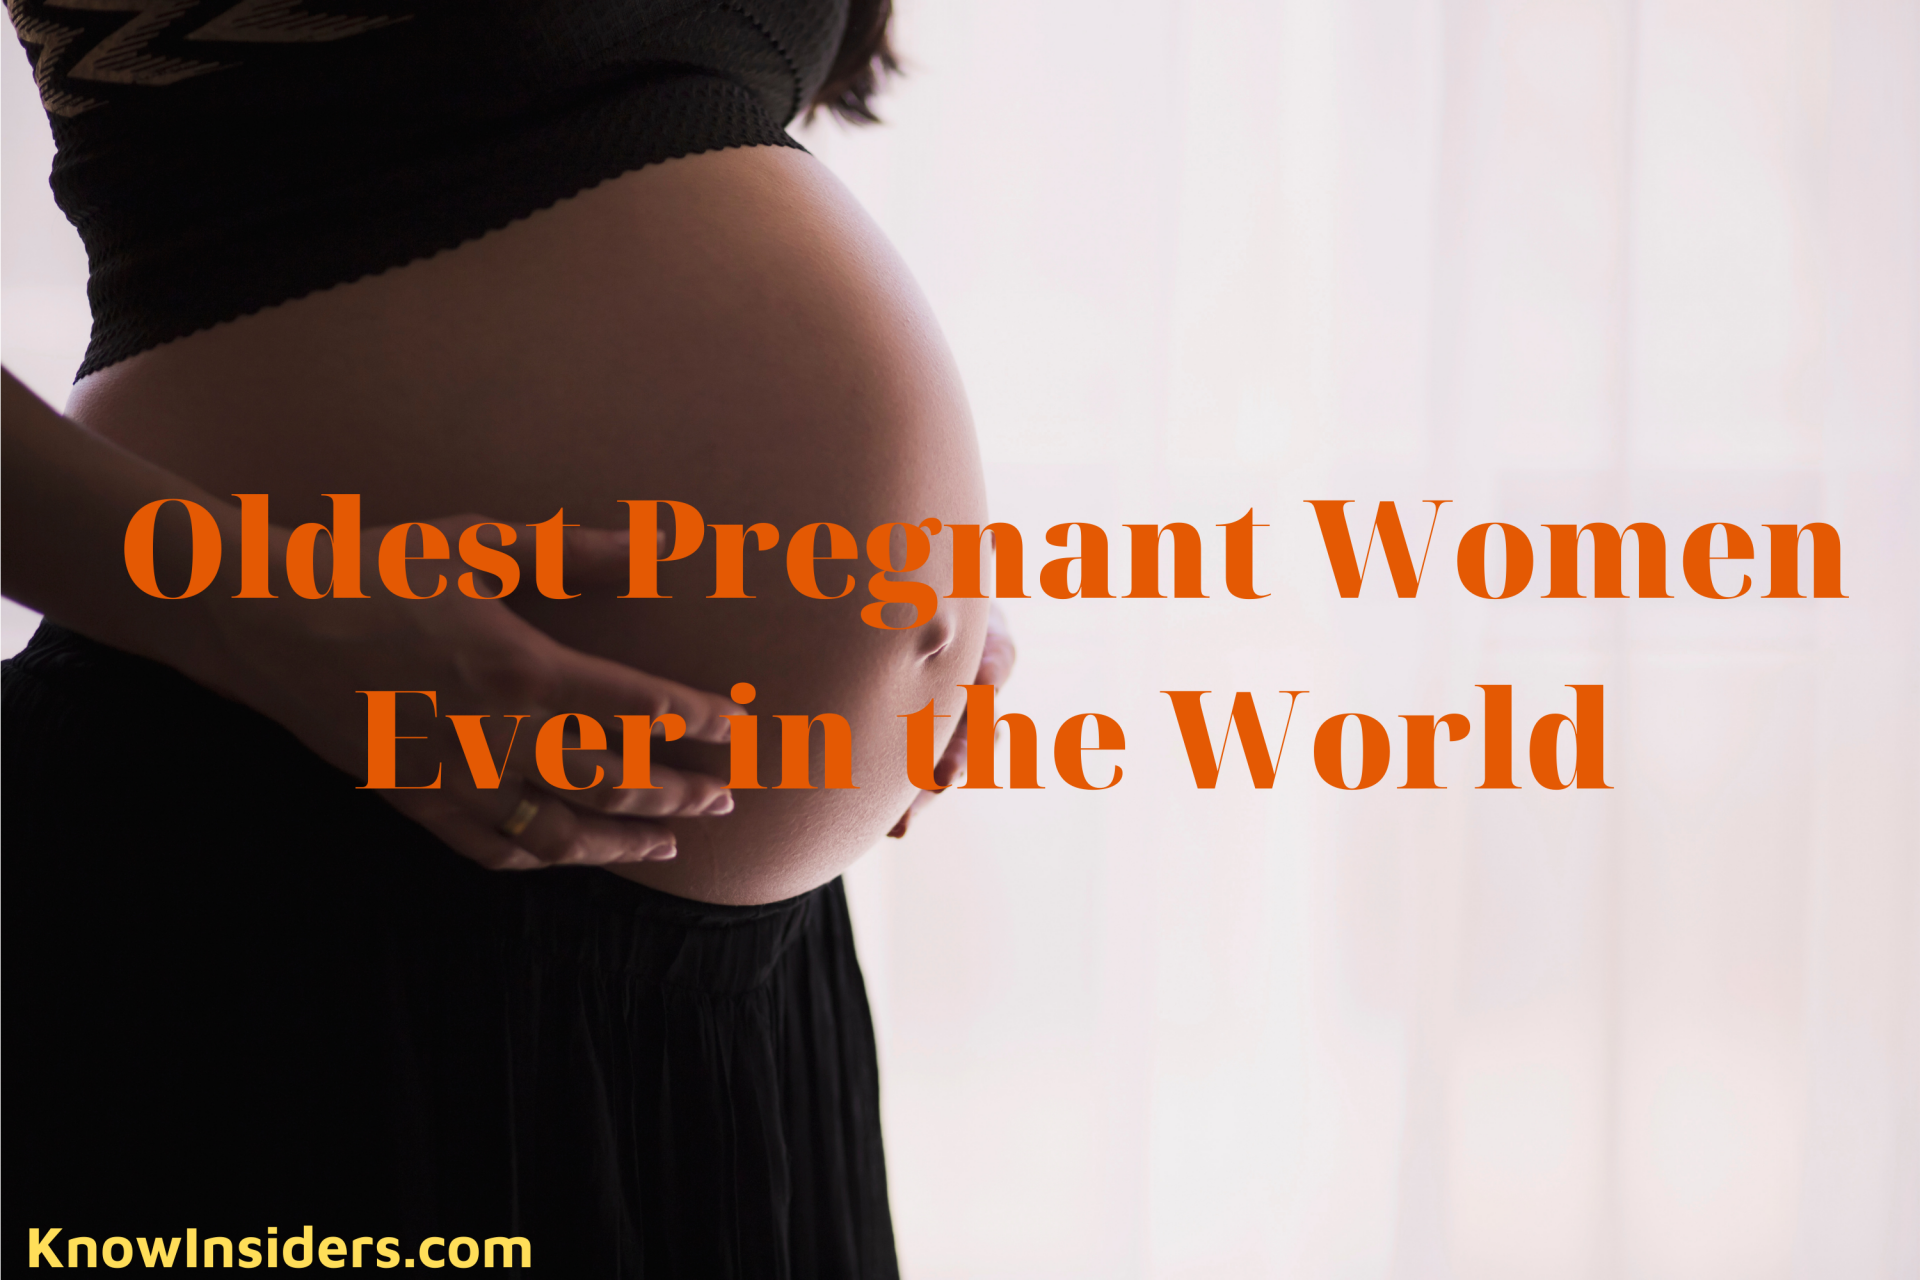 8 Oldest Pregnant Women Ever in the World